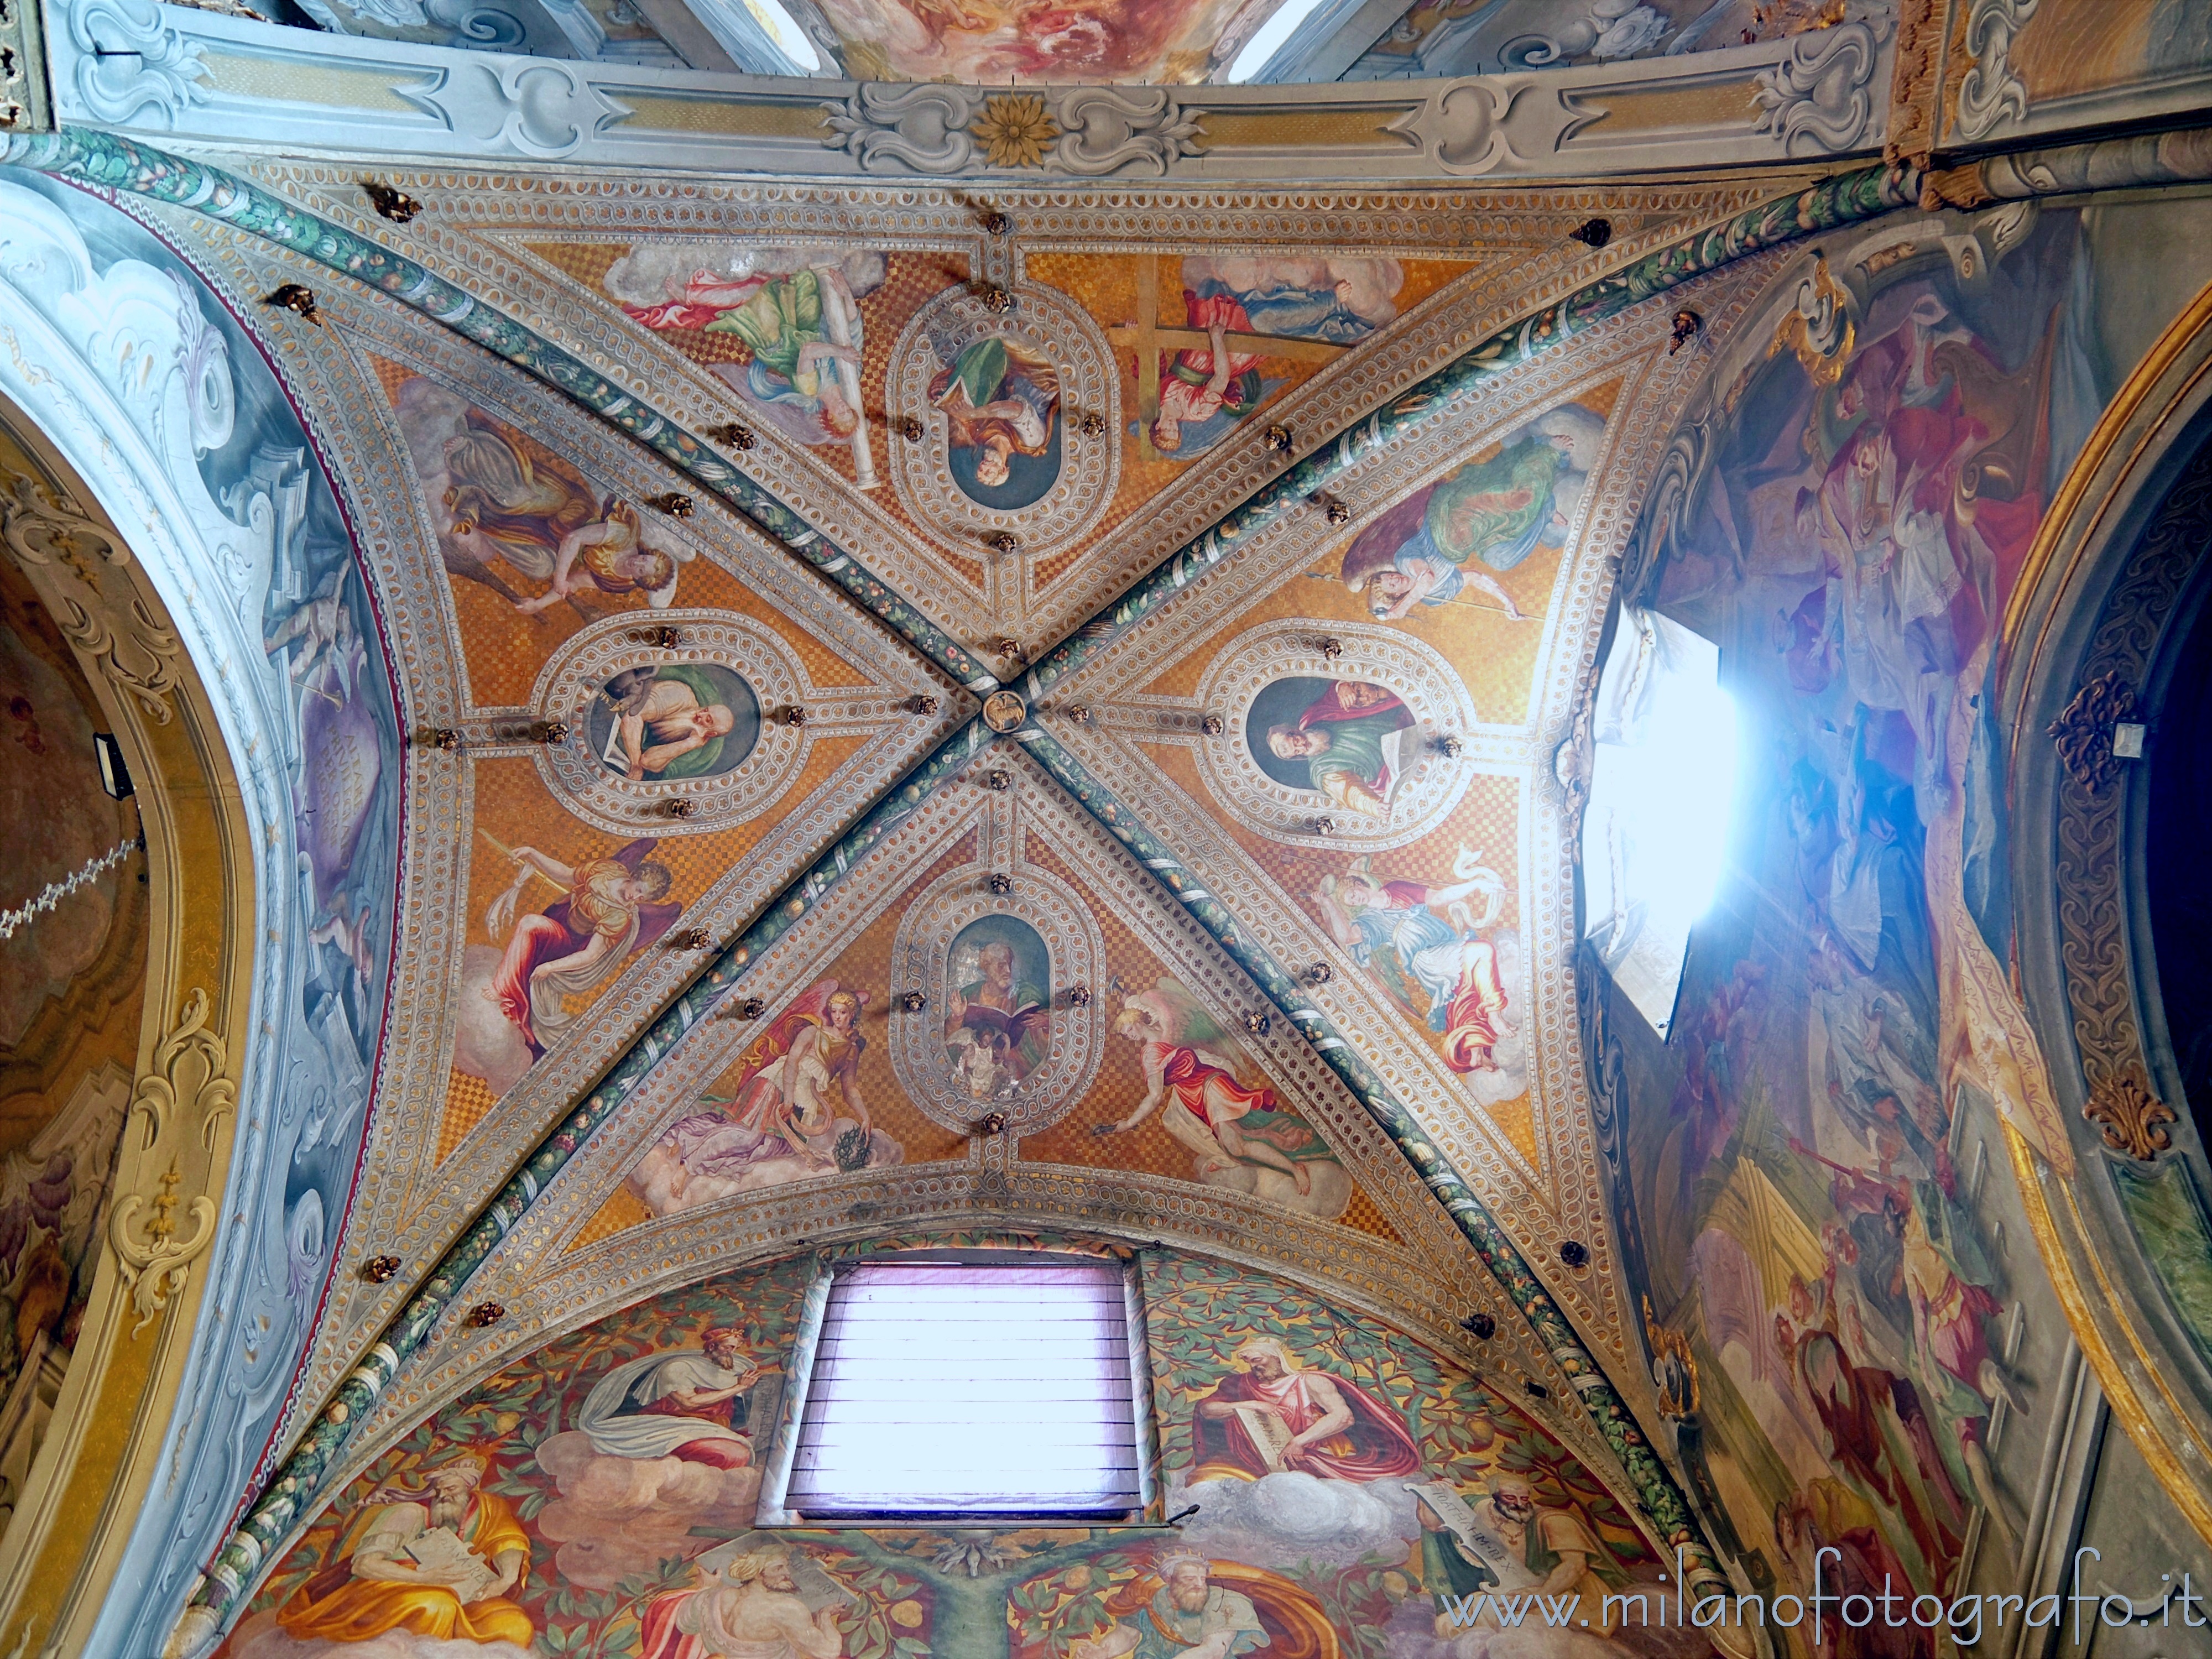 Monza (Monza e Brianza, Italy): Ceiling of the right arm of the transept of the Cathedral of Monza - Monza (Monza e Brianza, Italy)